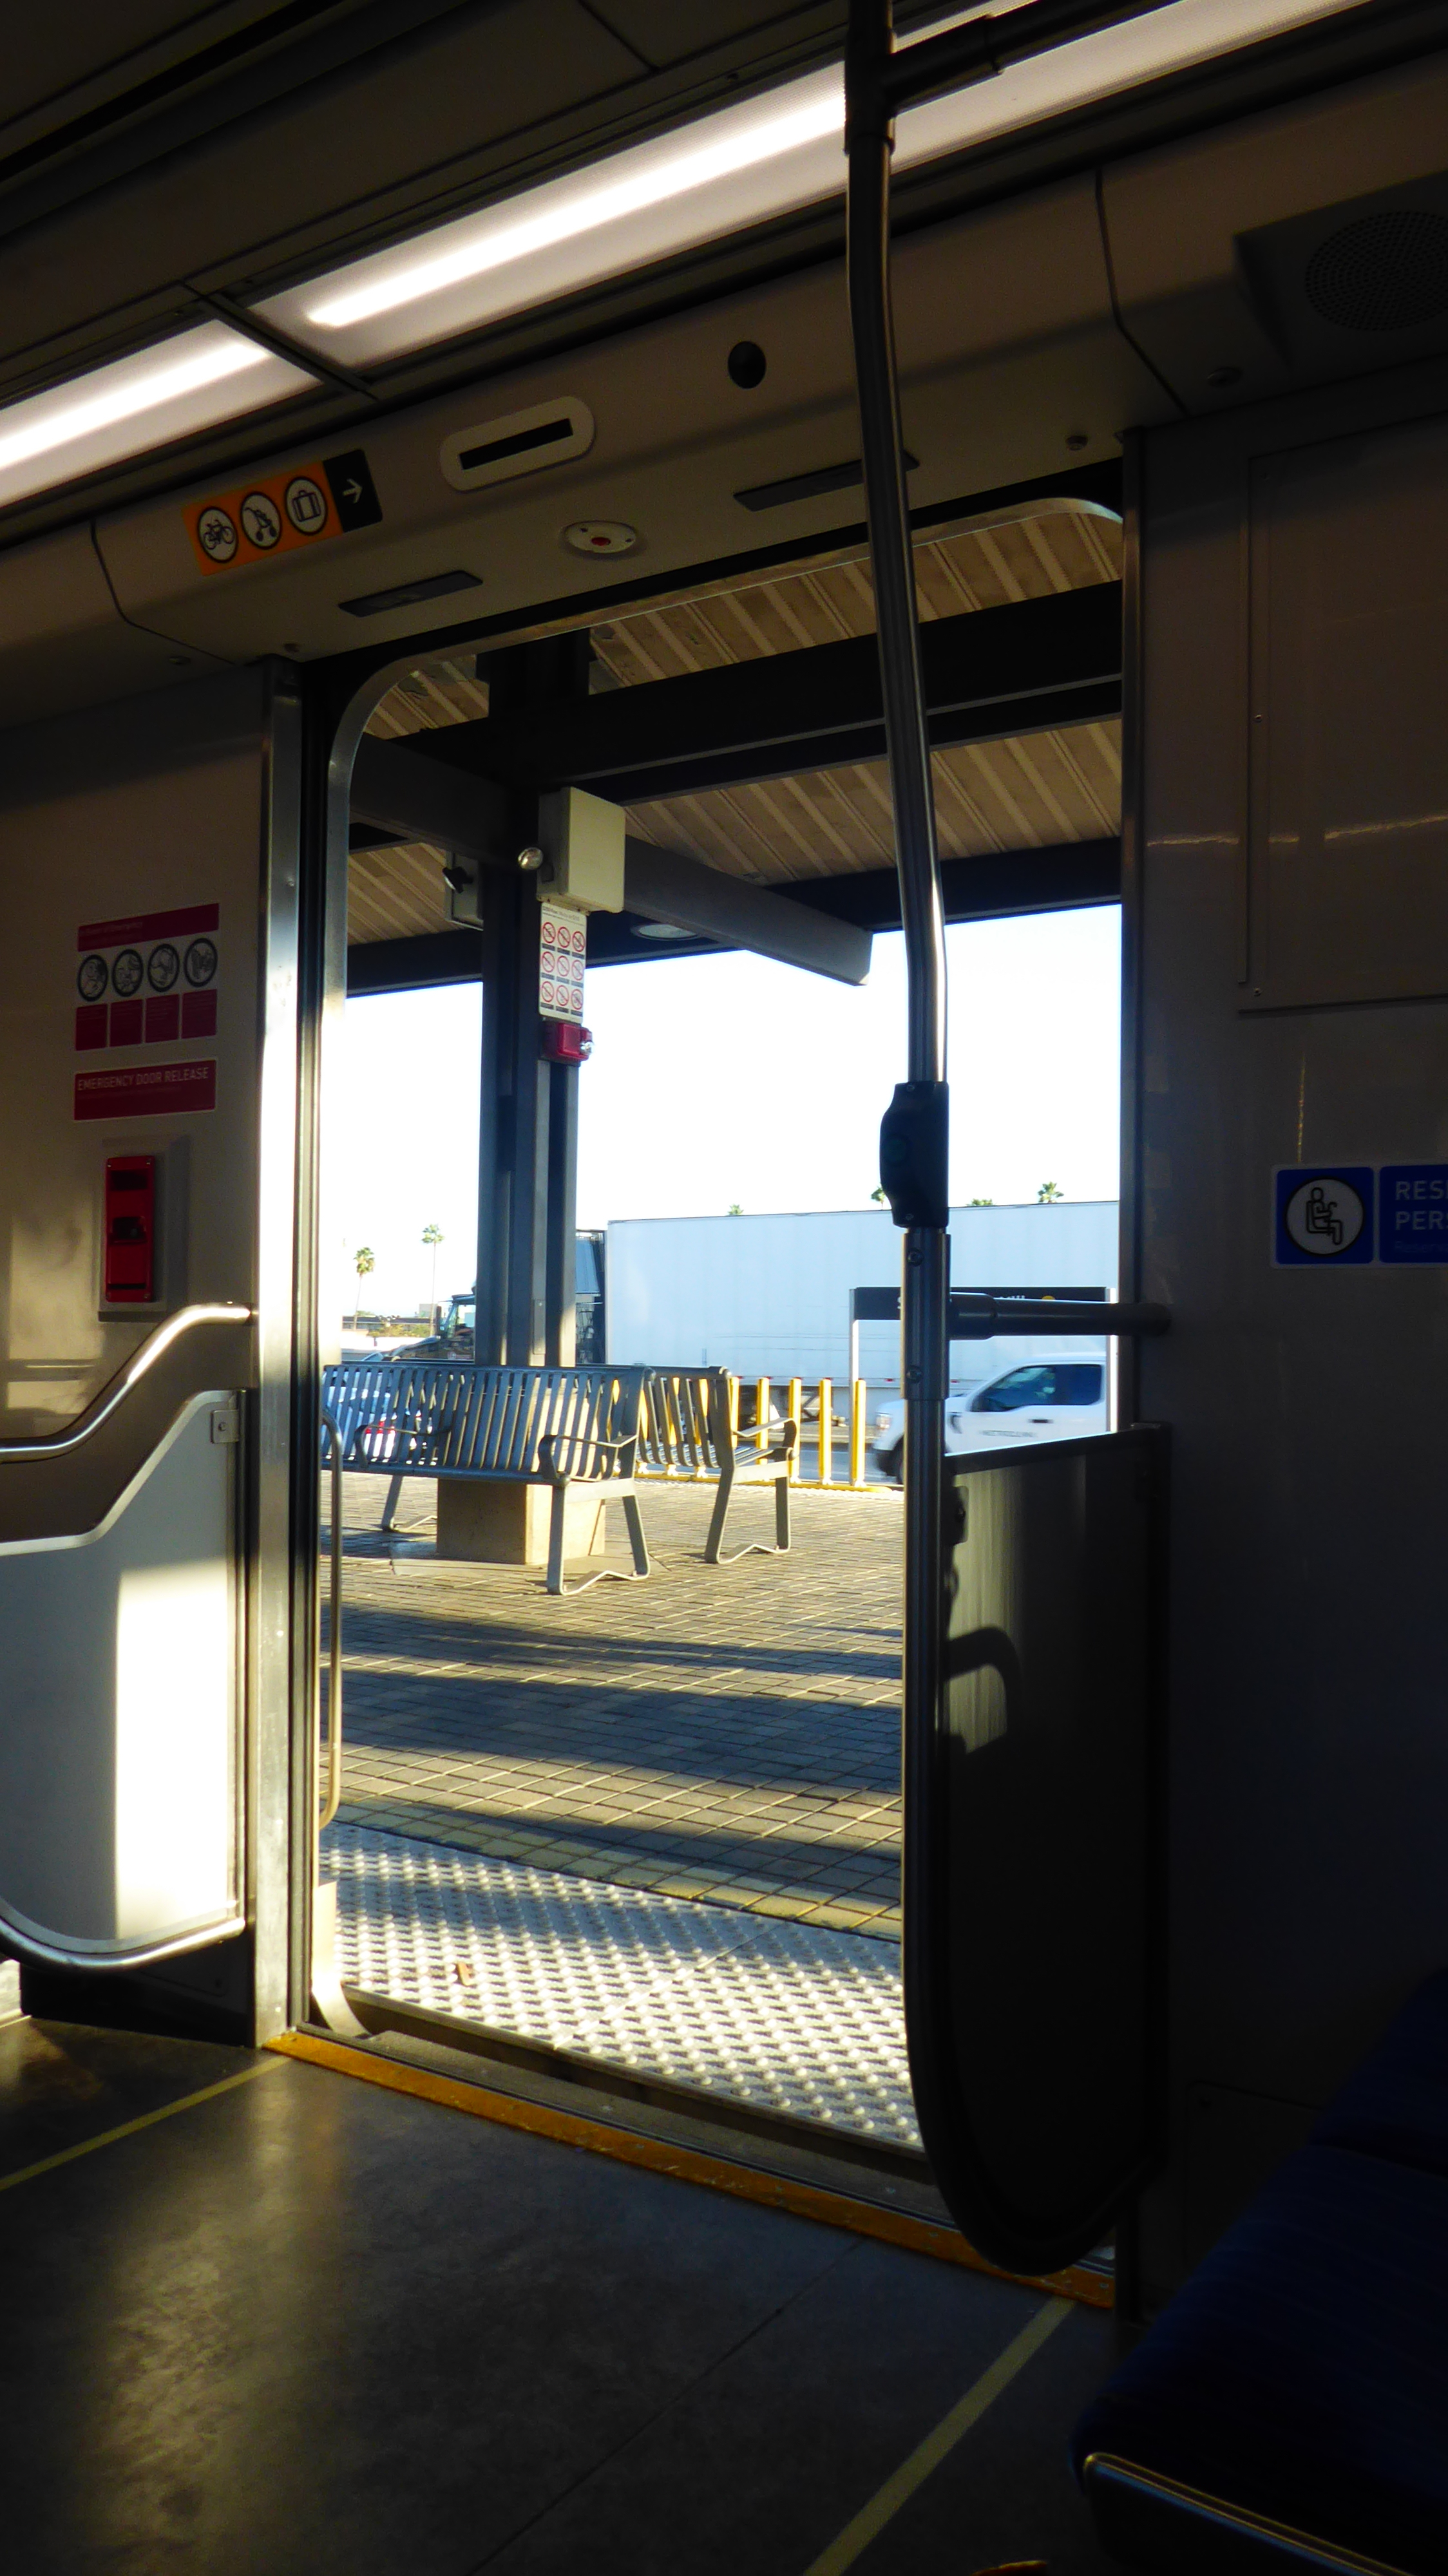 A photo of an open train door-- the inside is dark and warm colored, with a yellow light streaming in. You can see a bench and a truck passing by through the door.